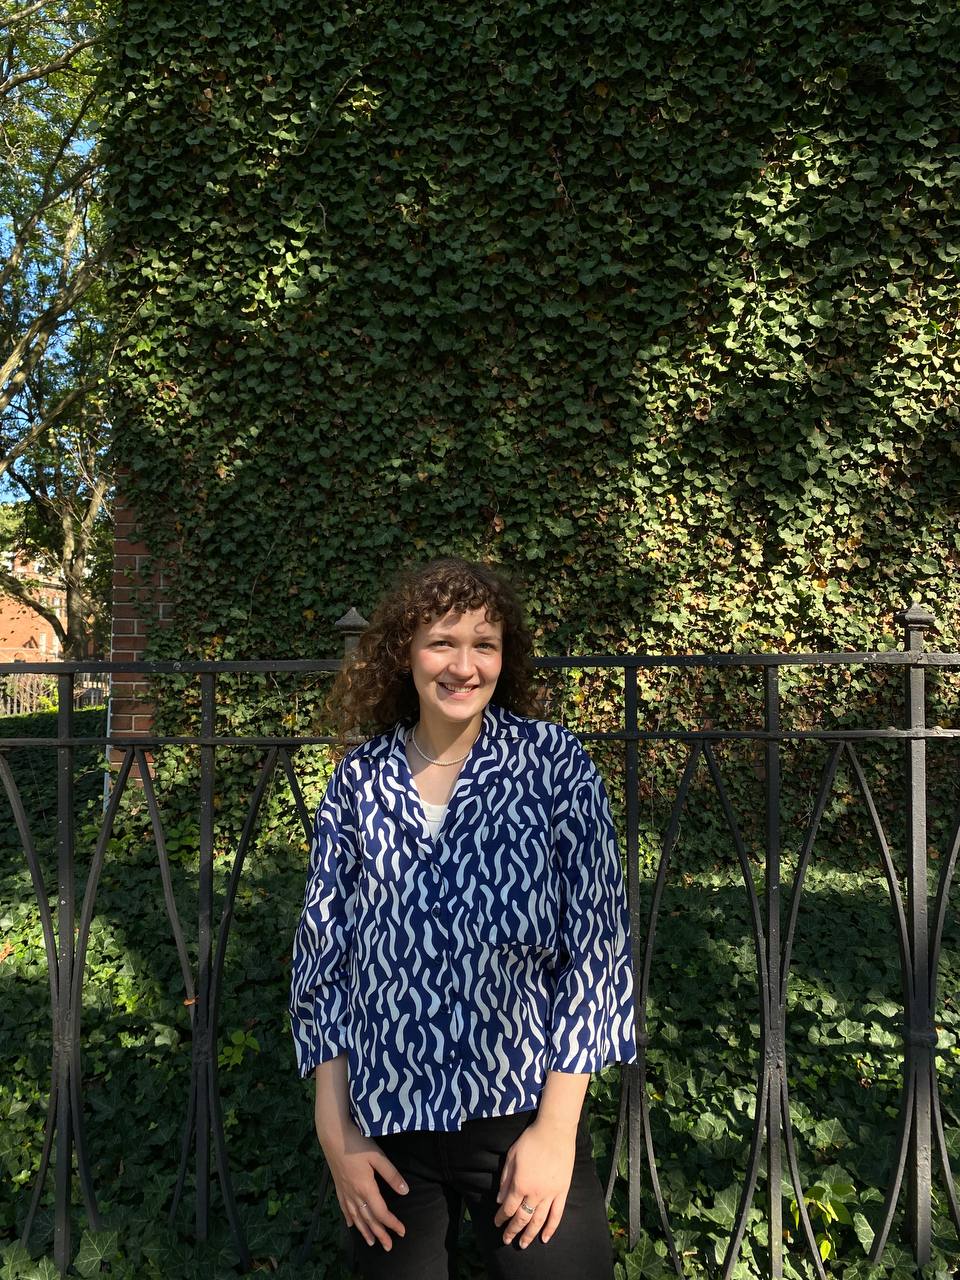 Woman with curly hair wearing a blue and white shirt in front of trees and a fence